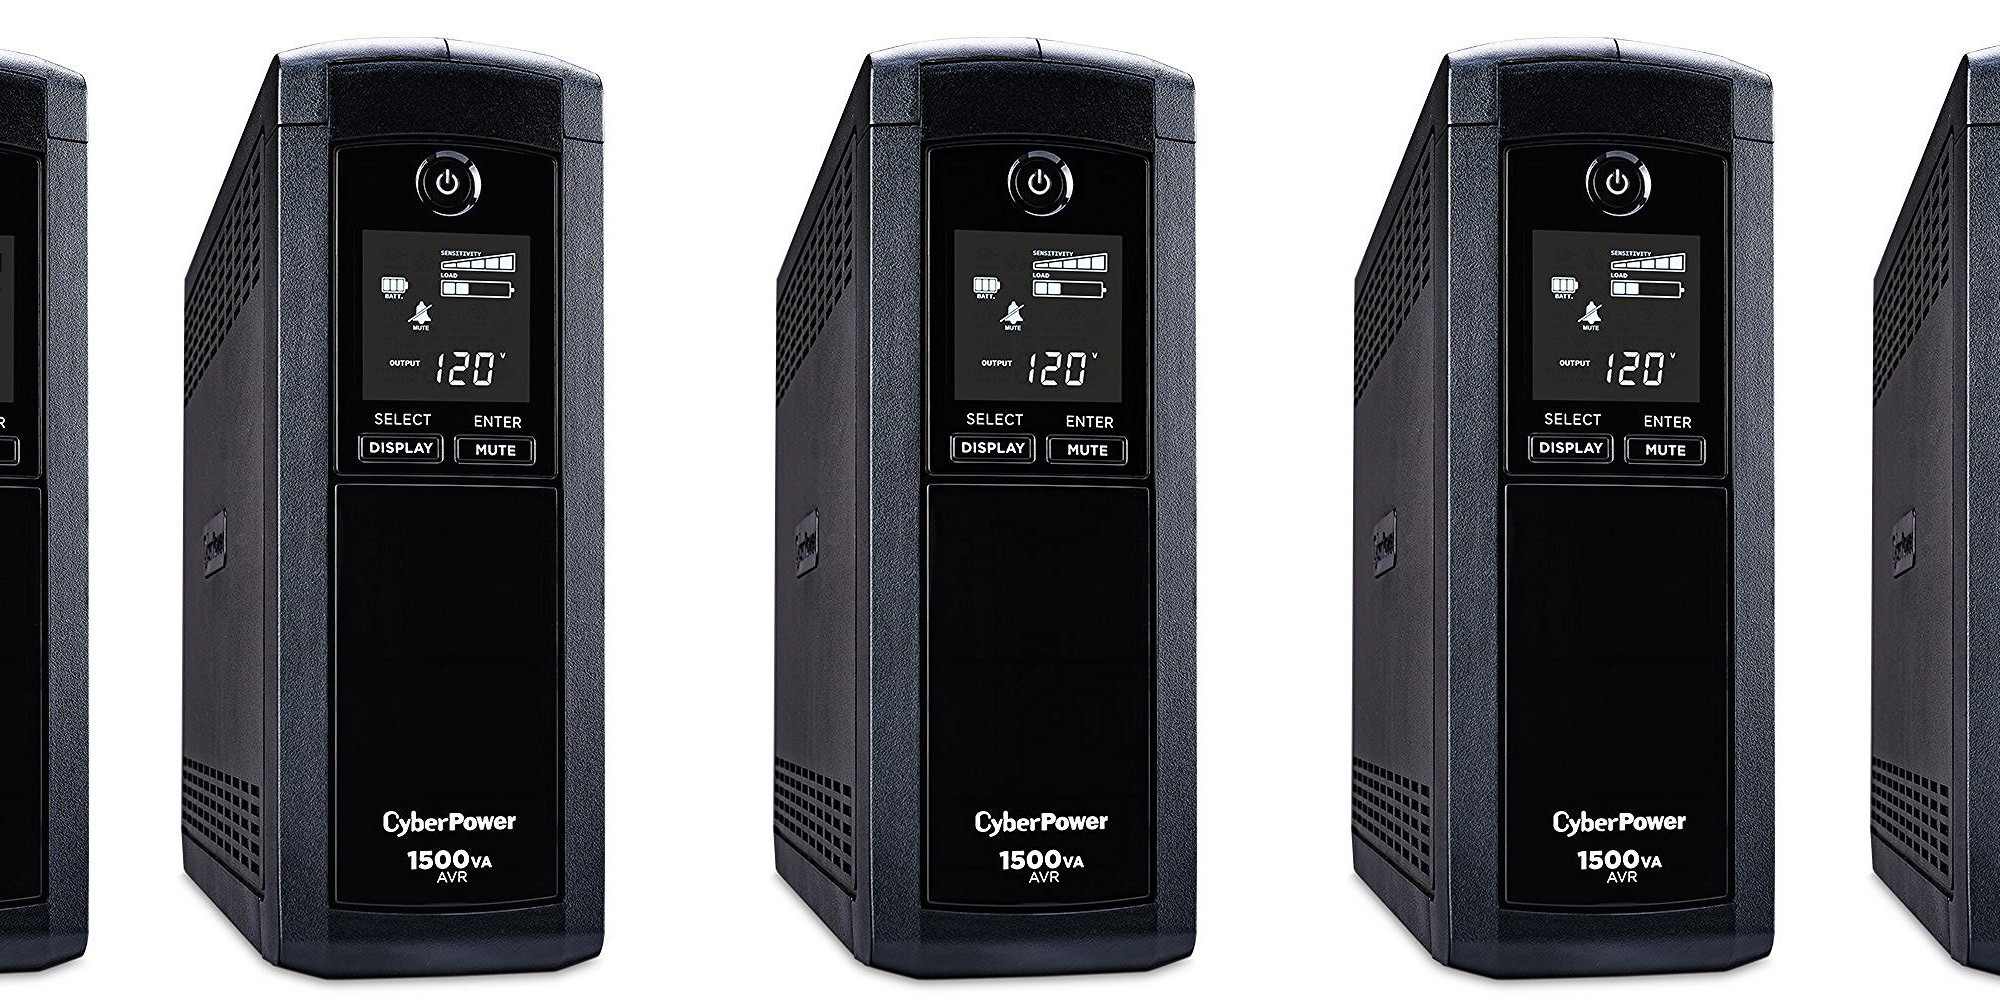 cyberpower battery backup just keeps beeping